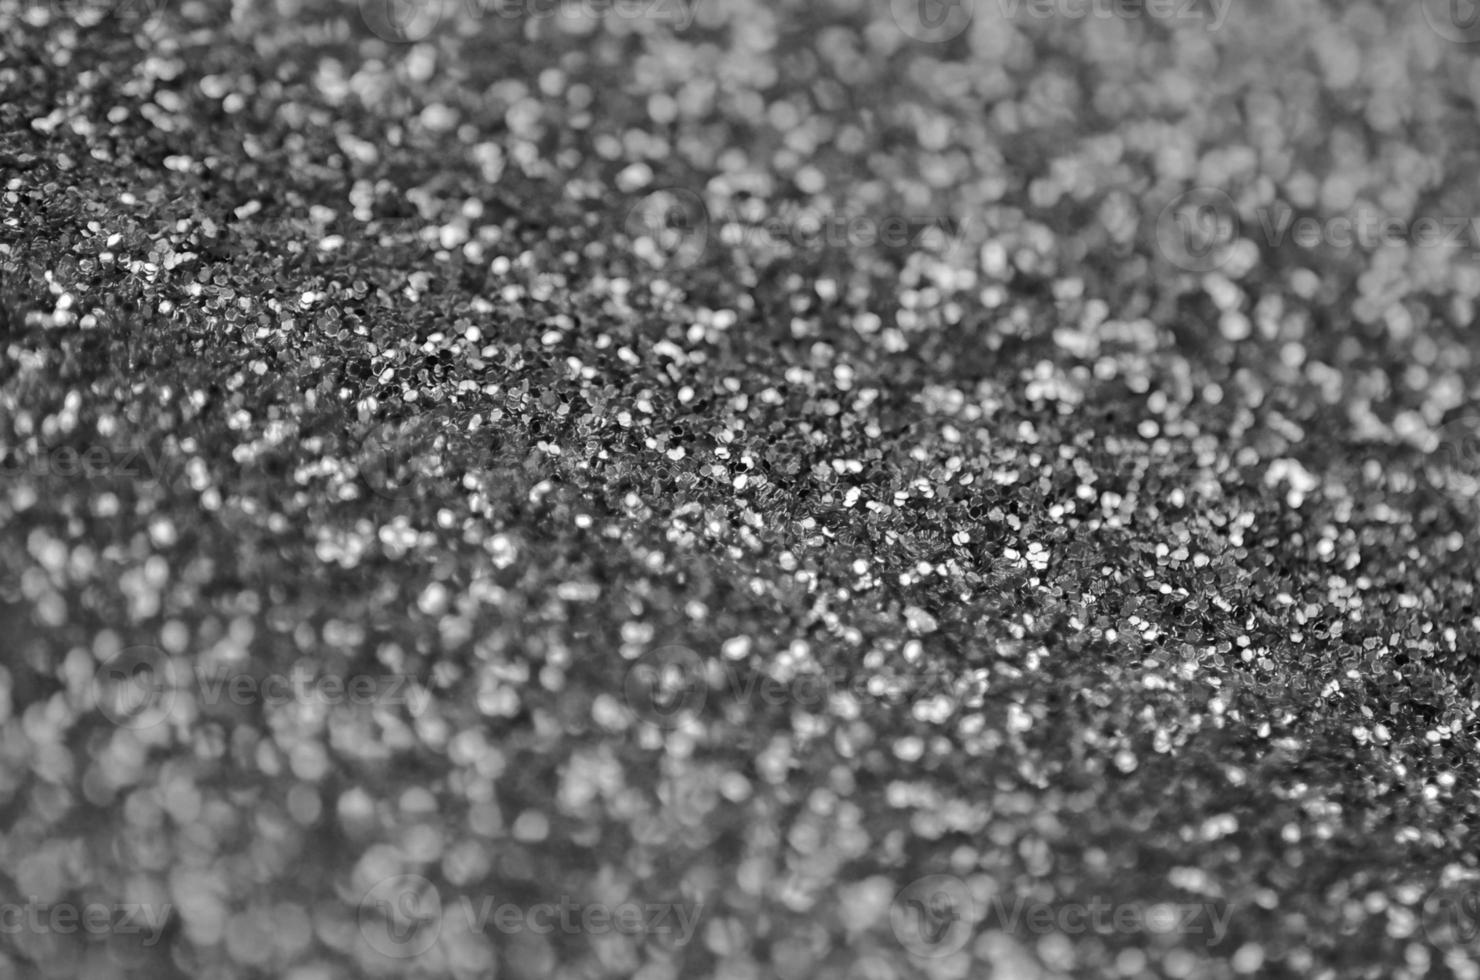 Silver decorative sequins. Background image with shiny bokeh lights from small elements photo